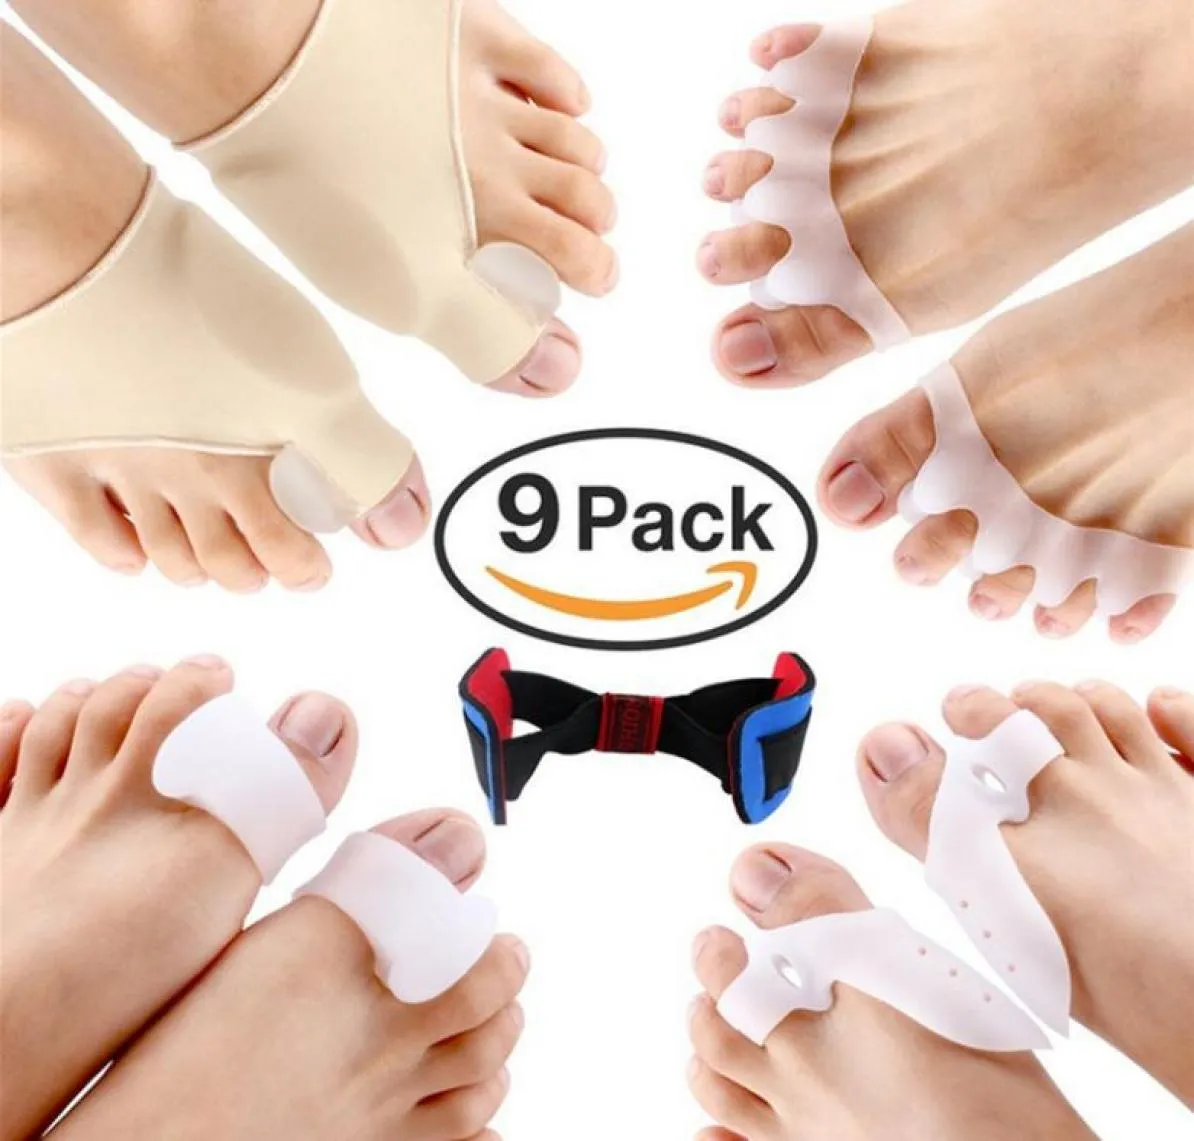 Bunion corrector Protector Sleeves Kit Foot Treatment for Cure Pain in Big Joint Tailors Hallux Valgus Hammer Separators Spacers1756823